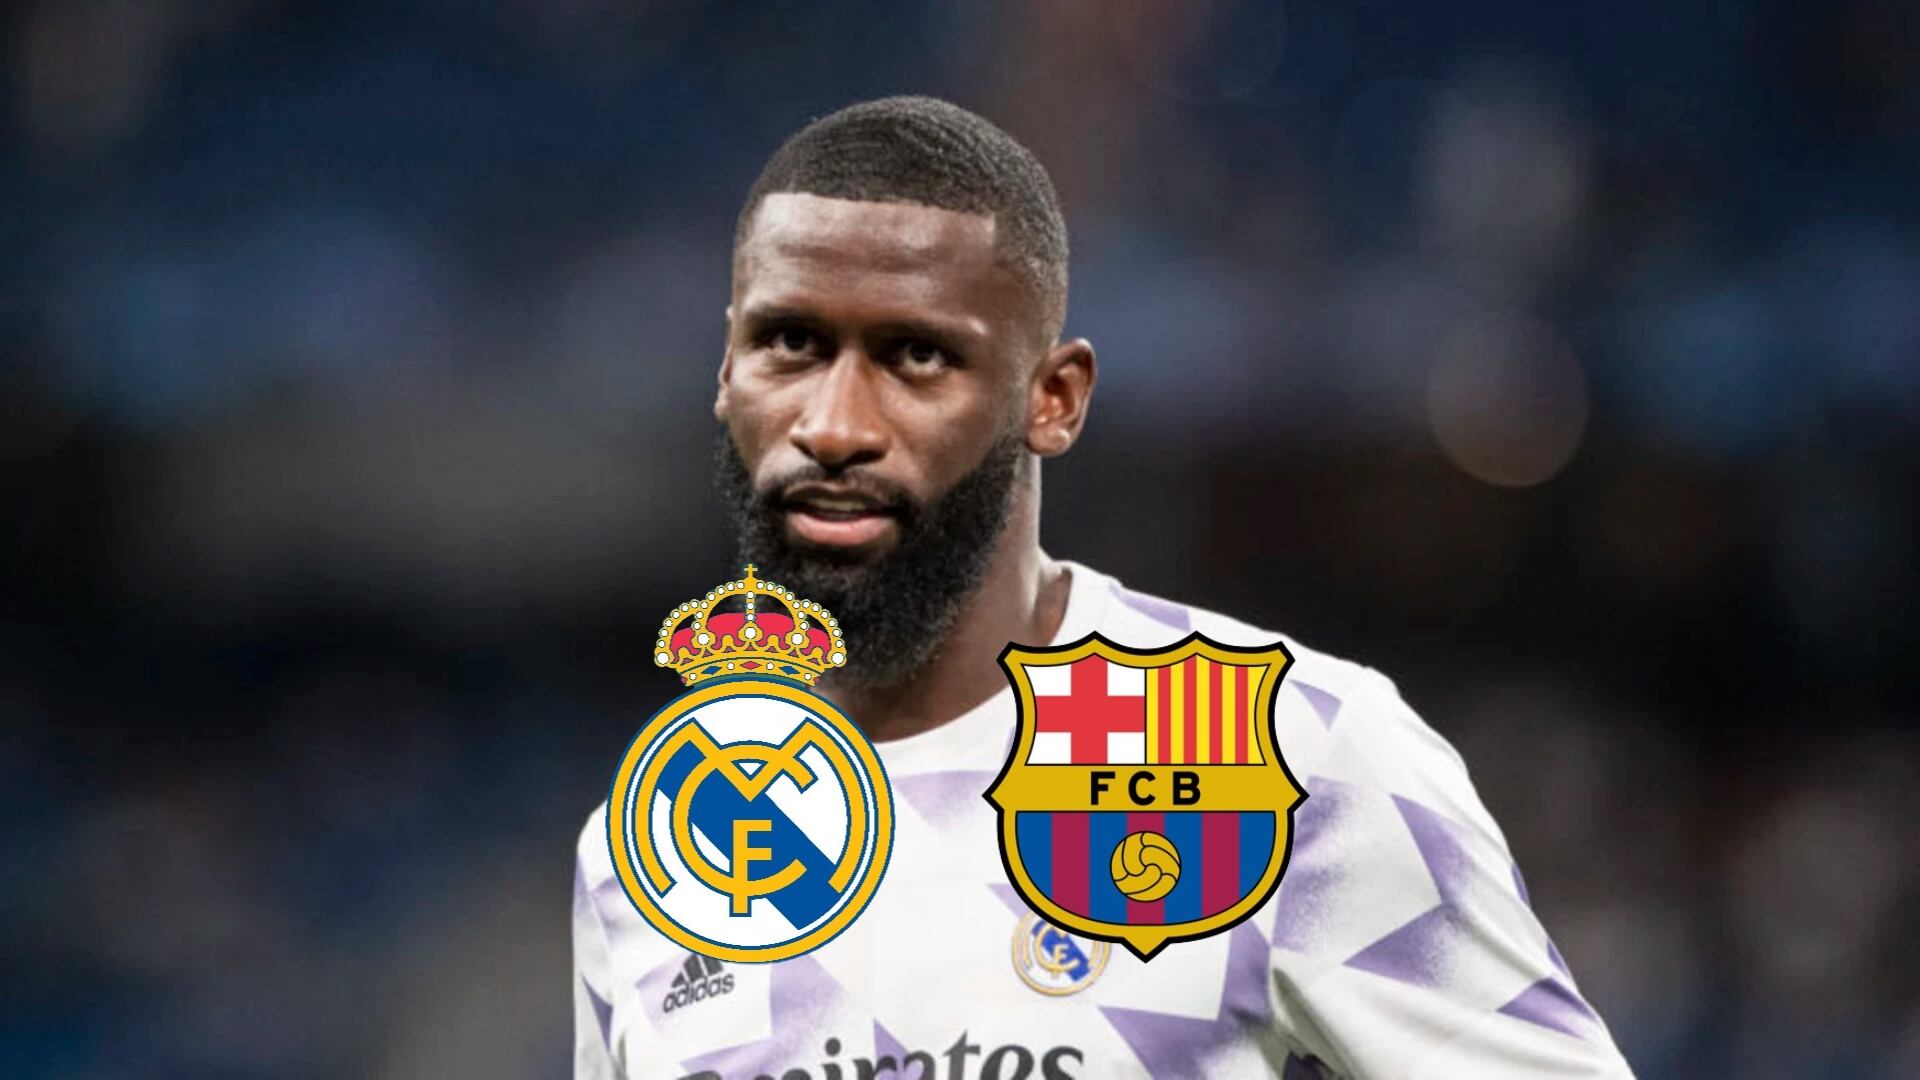 (VIDEO) Before the warm up, Real Madrid's Rudiger had an encounter with the police, this is how it went